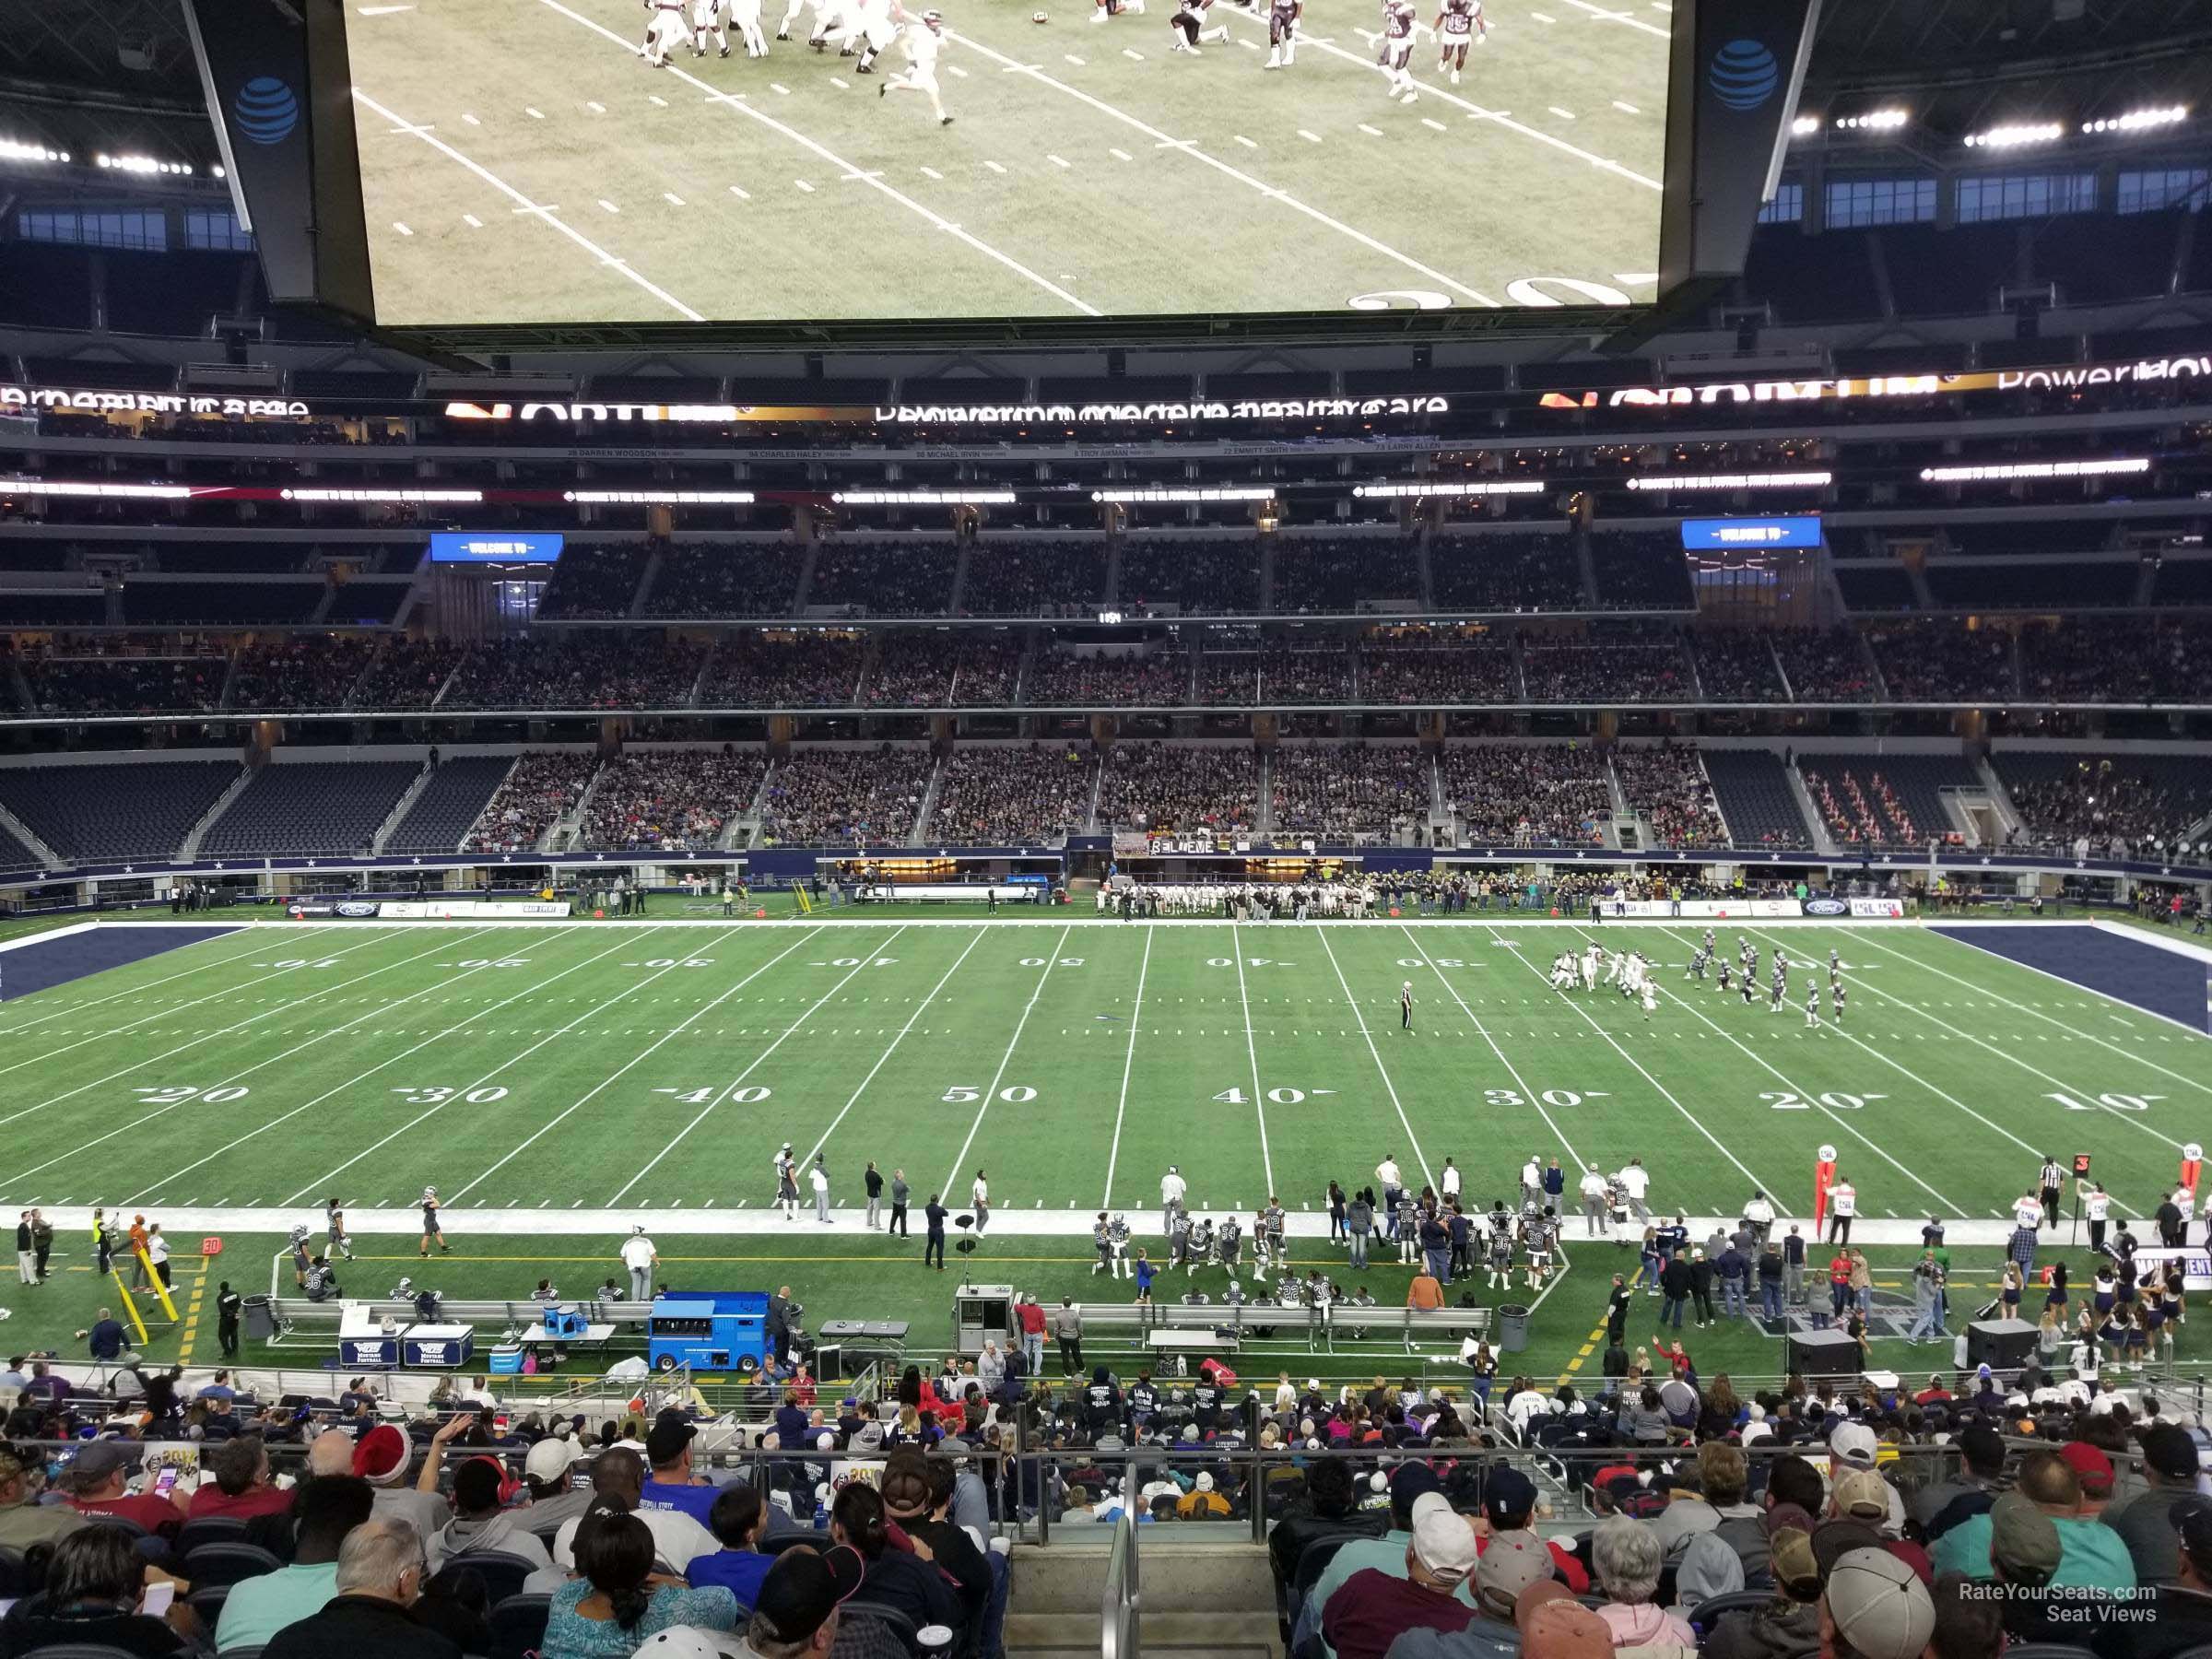 section c209, row 10 seat view  for football - at&t stadium (cowboys stadium)